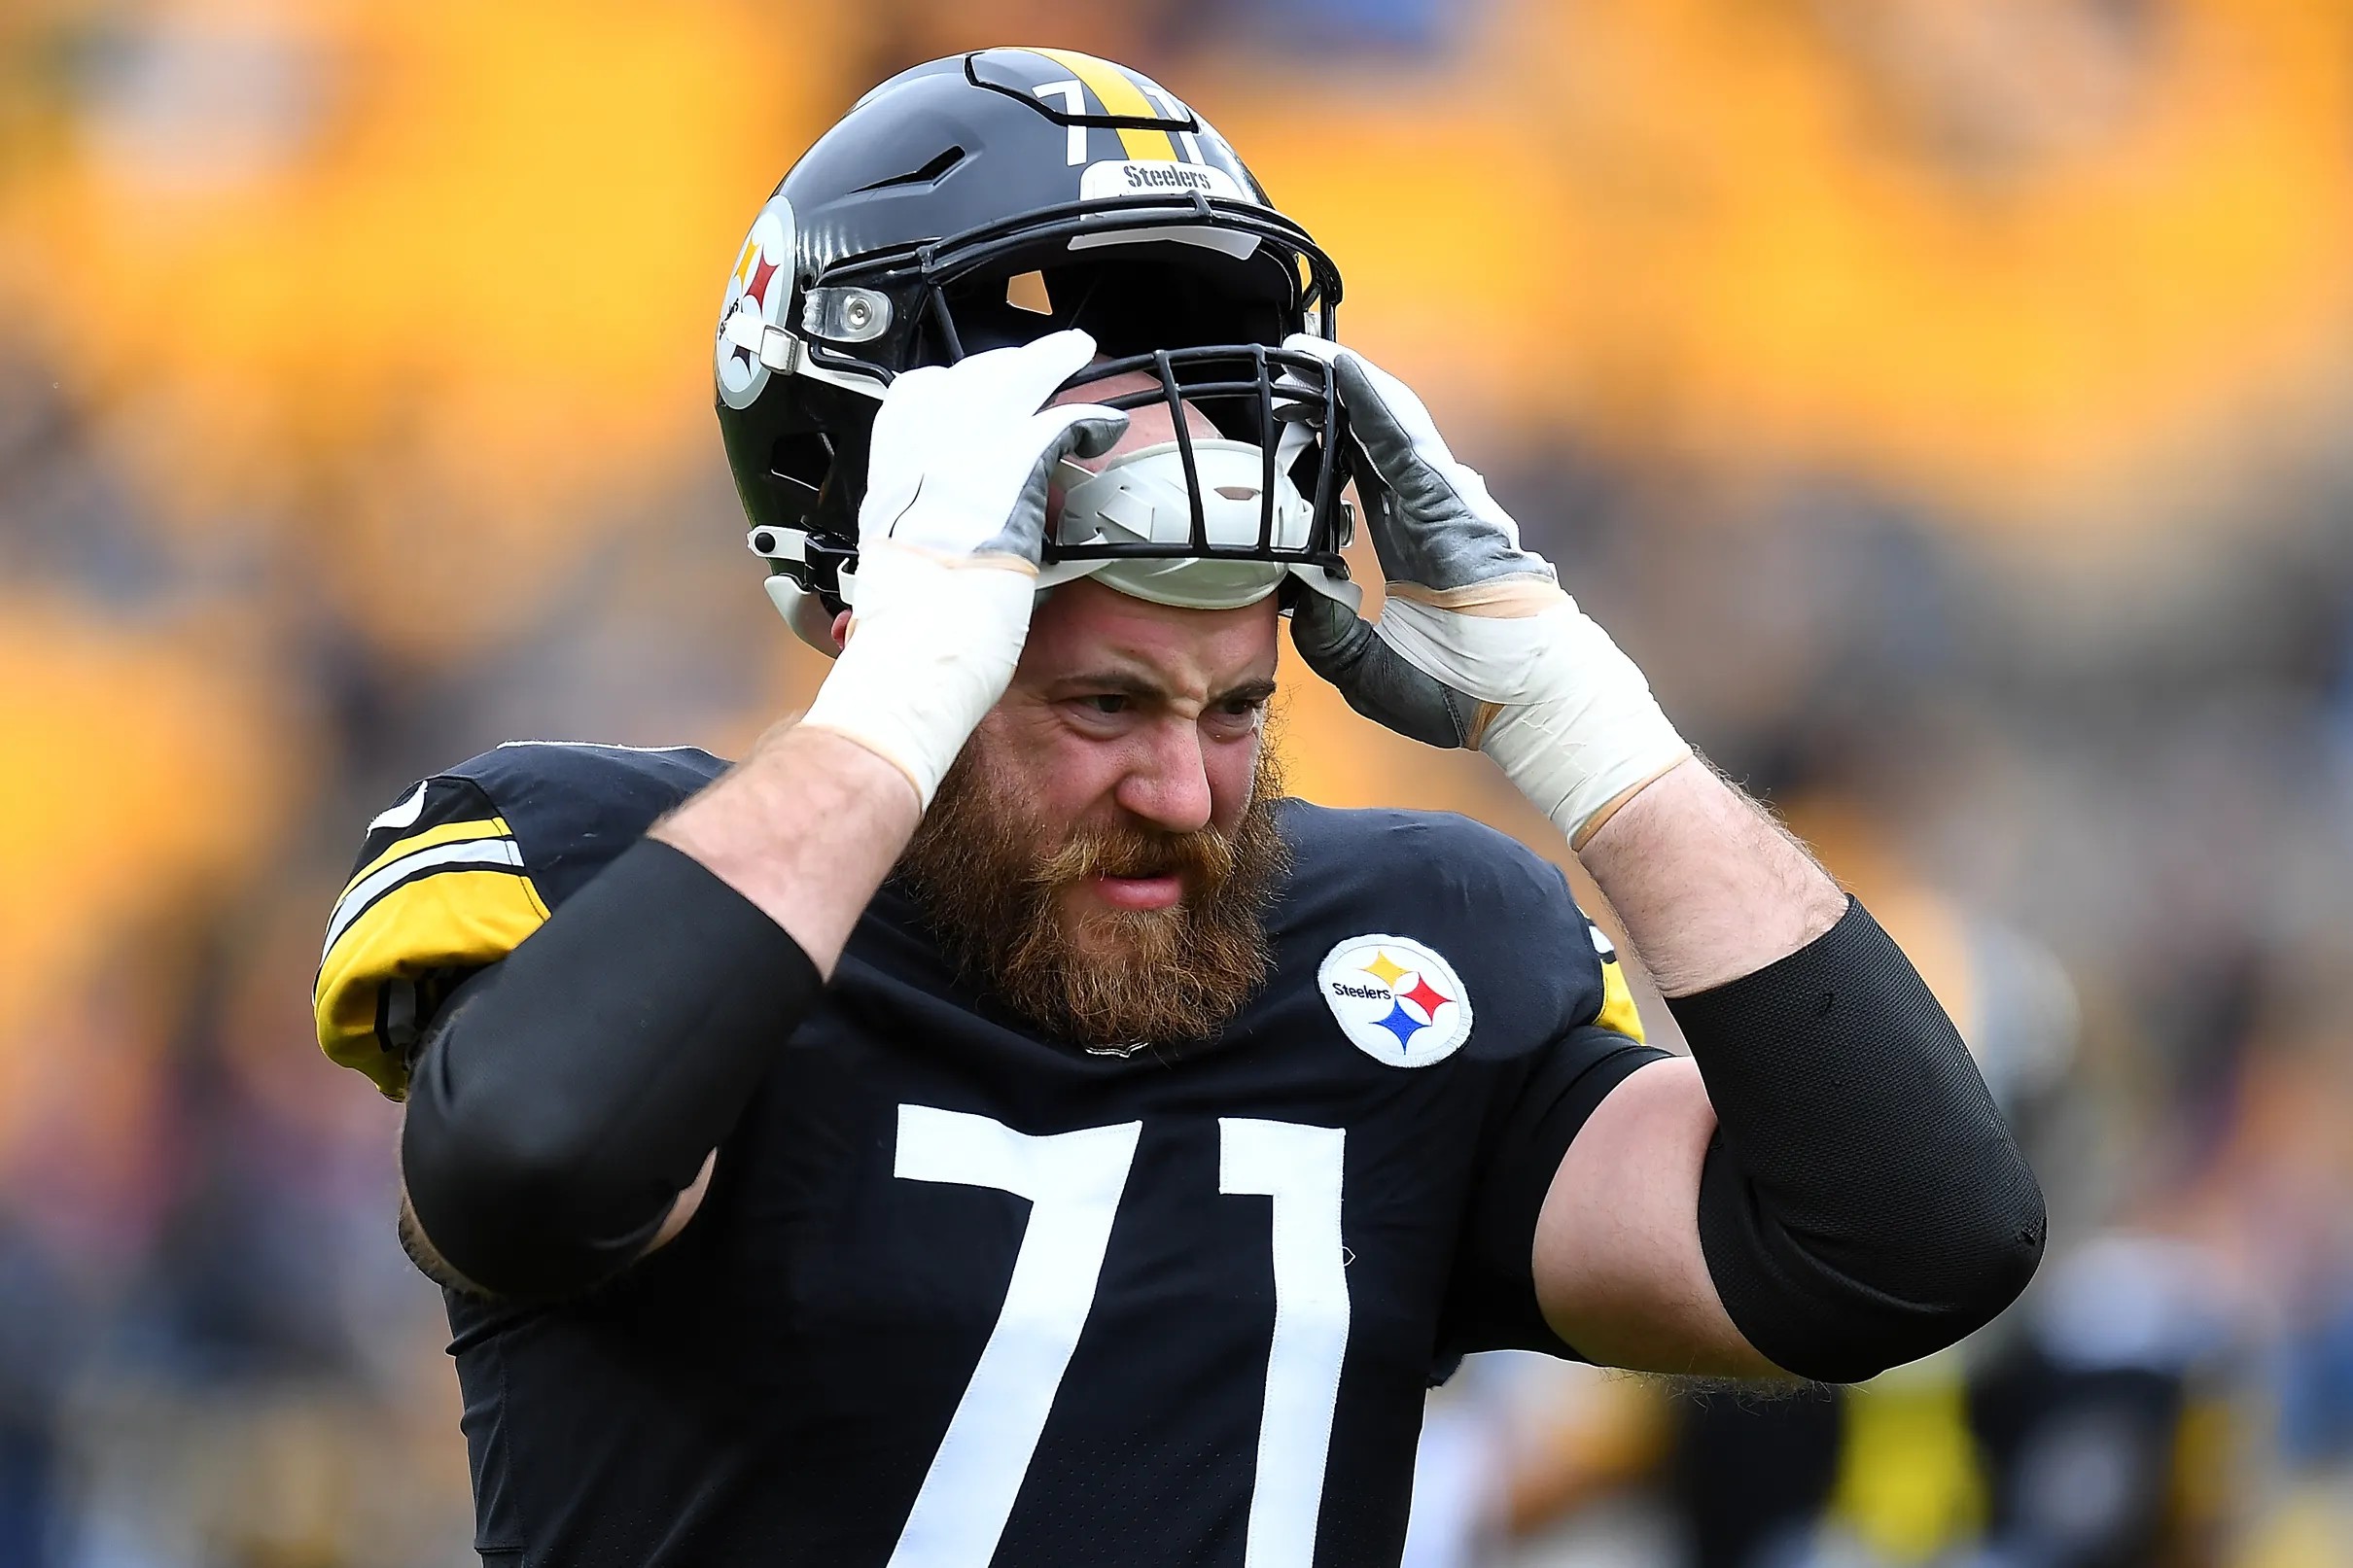 Looking at the Steelers projected 2022 compensatory draft picks